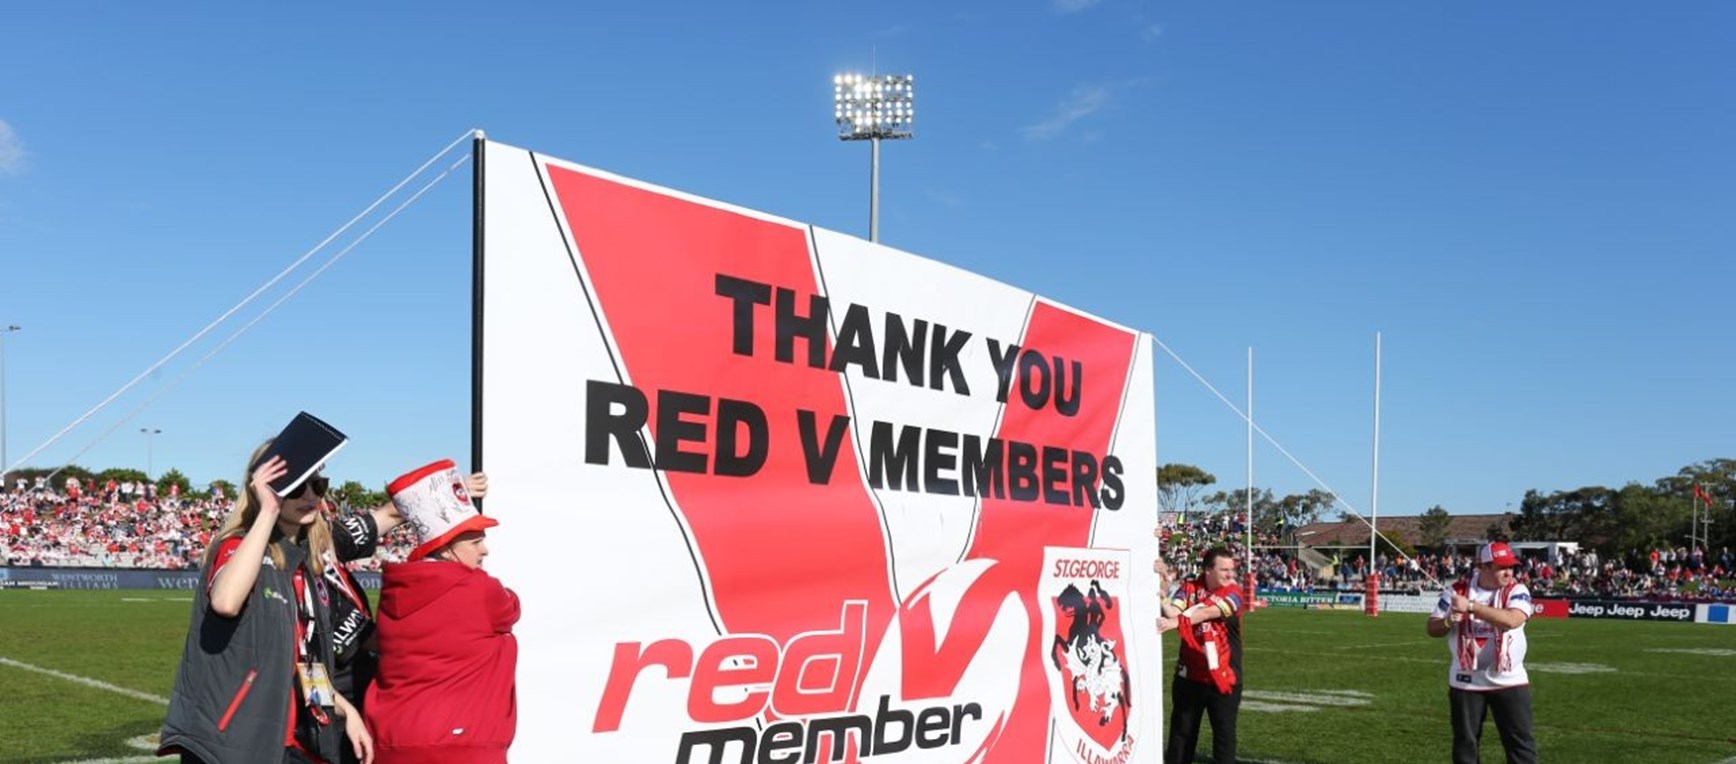 Dragons Thank Red V Members!